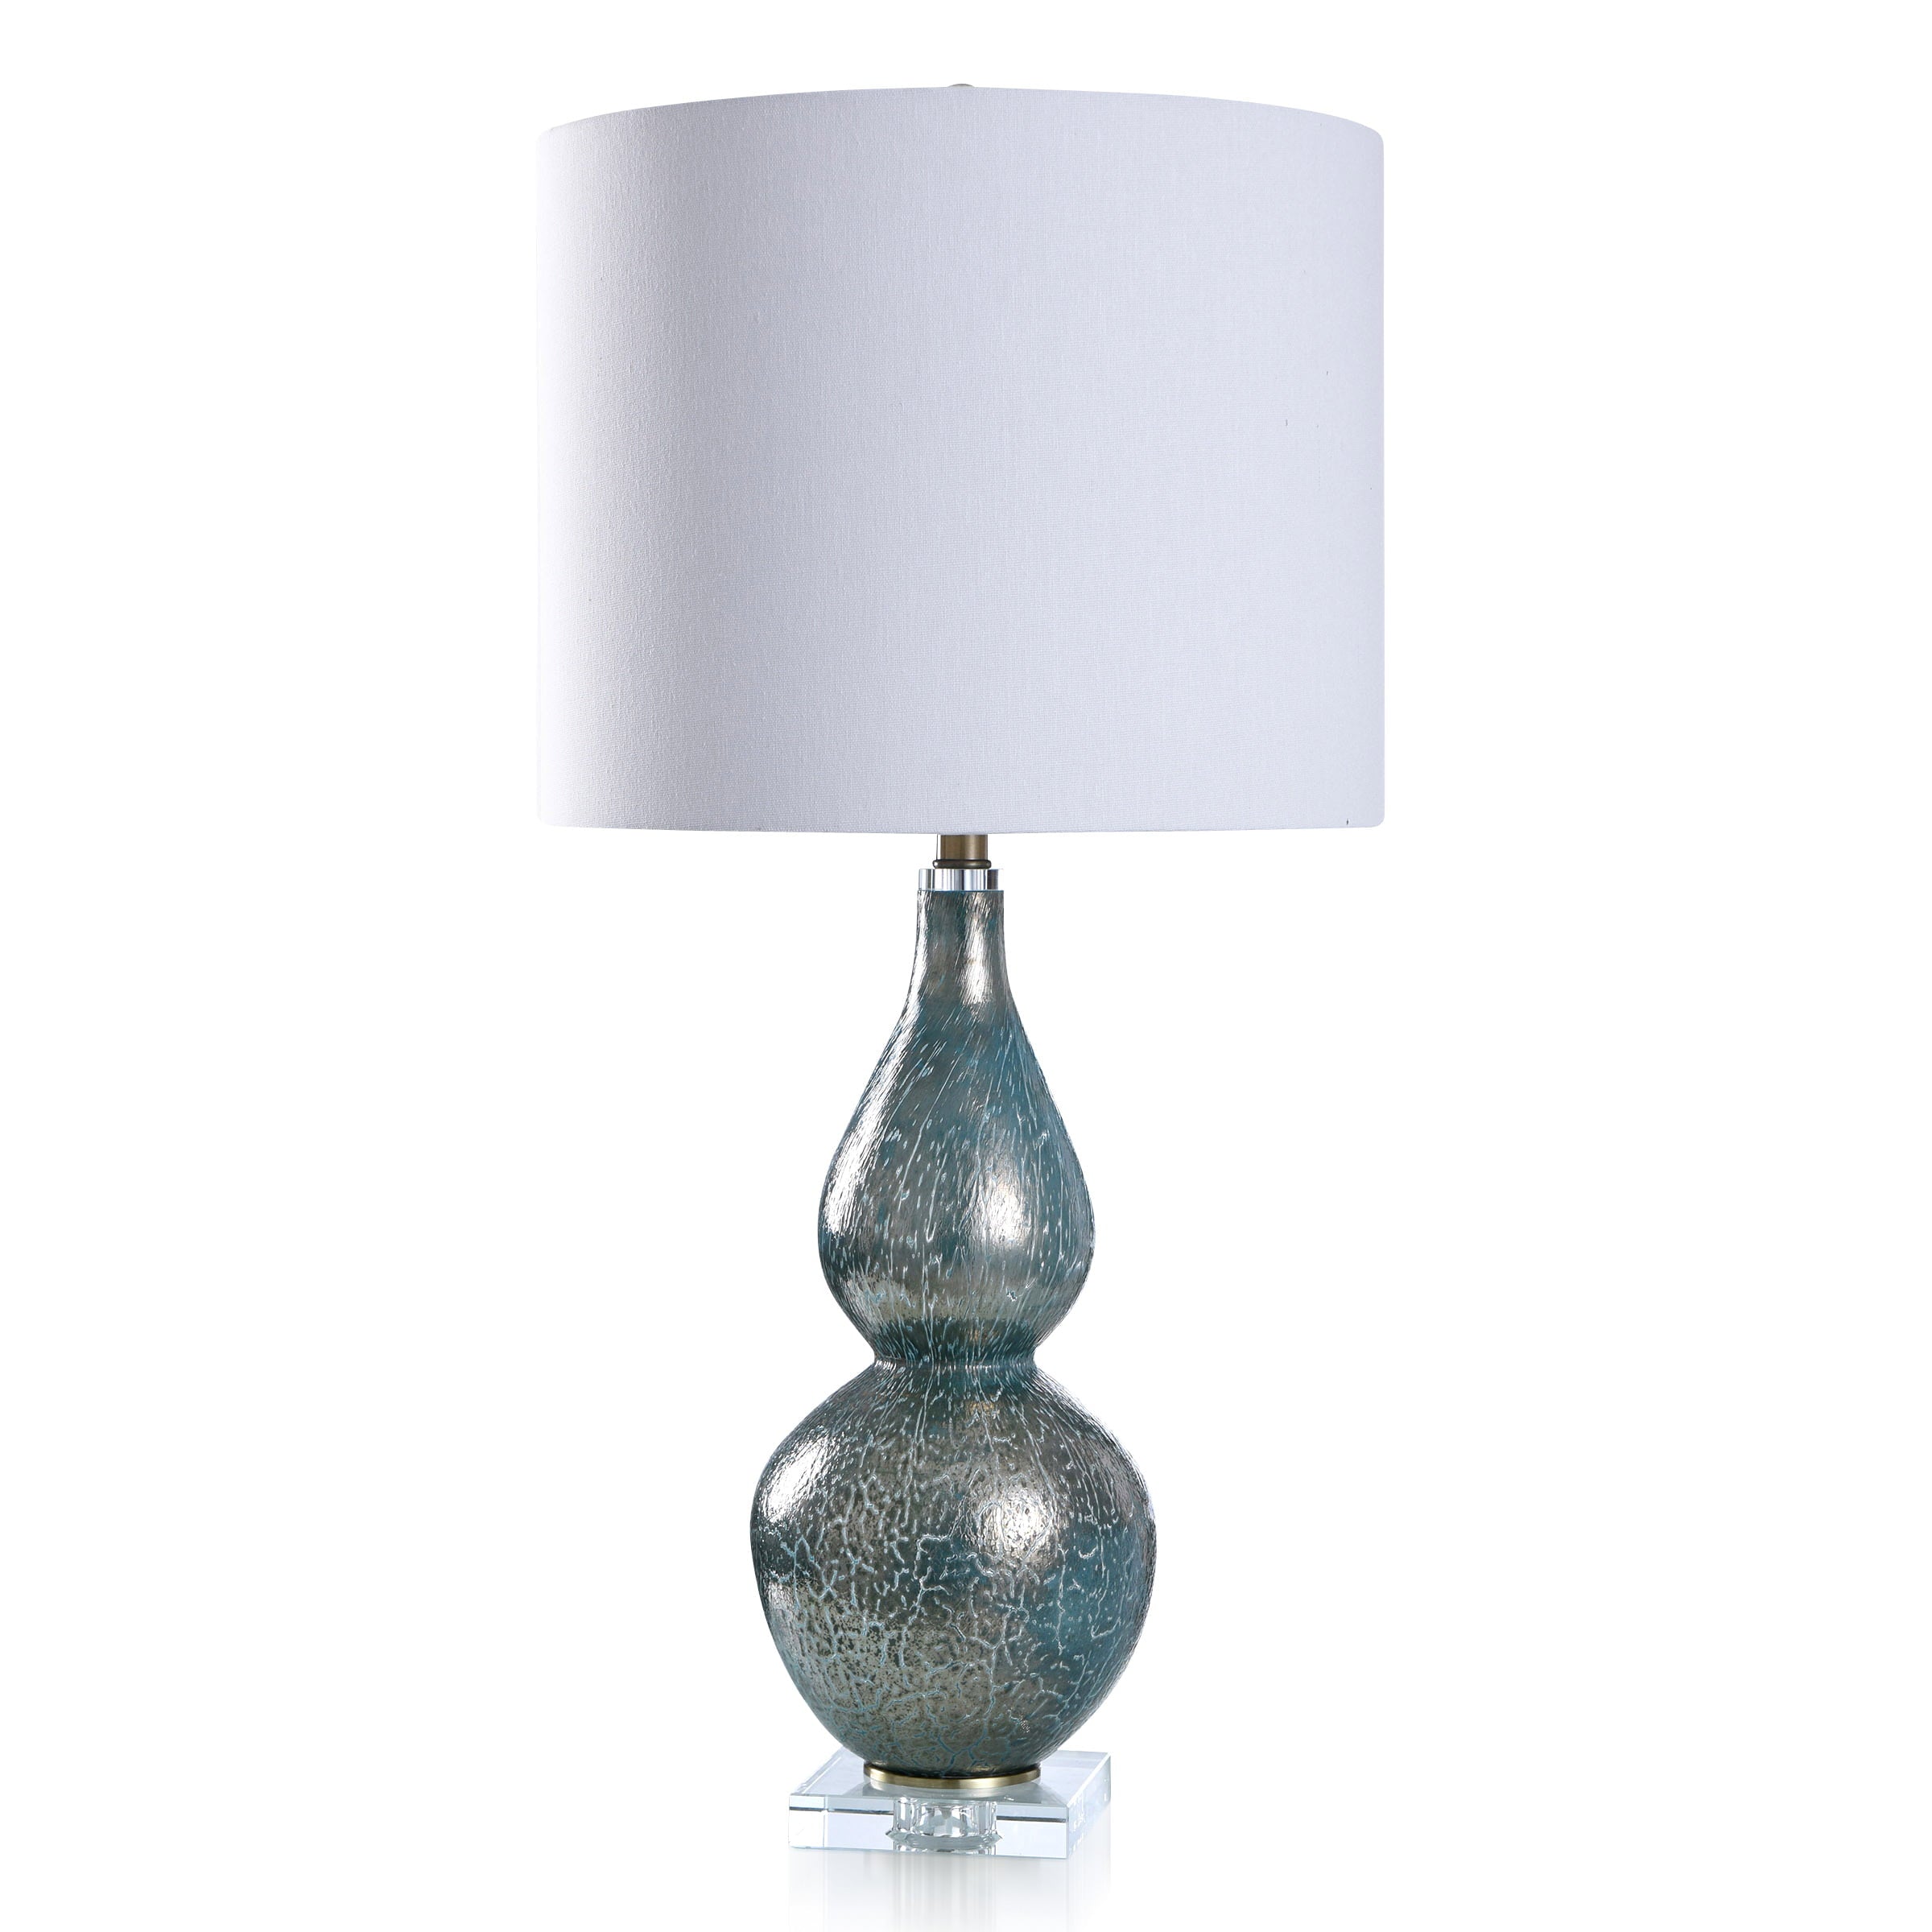 Bay St. Louis - Textured Glass Painted Body Table Lamp With Crystal Glass Base - Blue Finish - White Shade